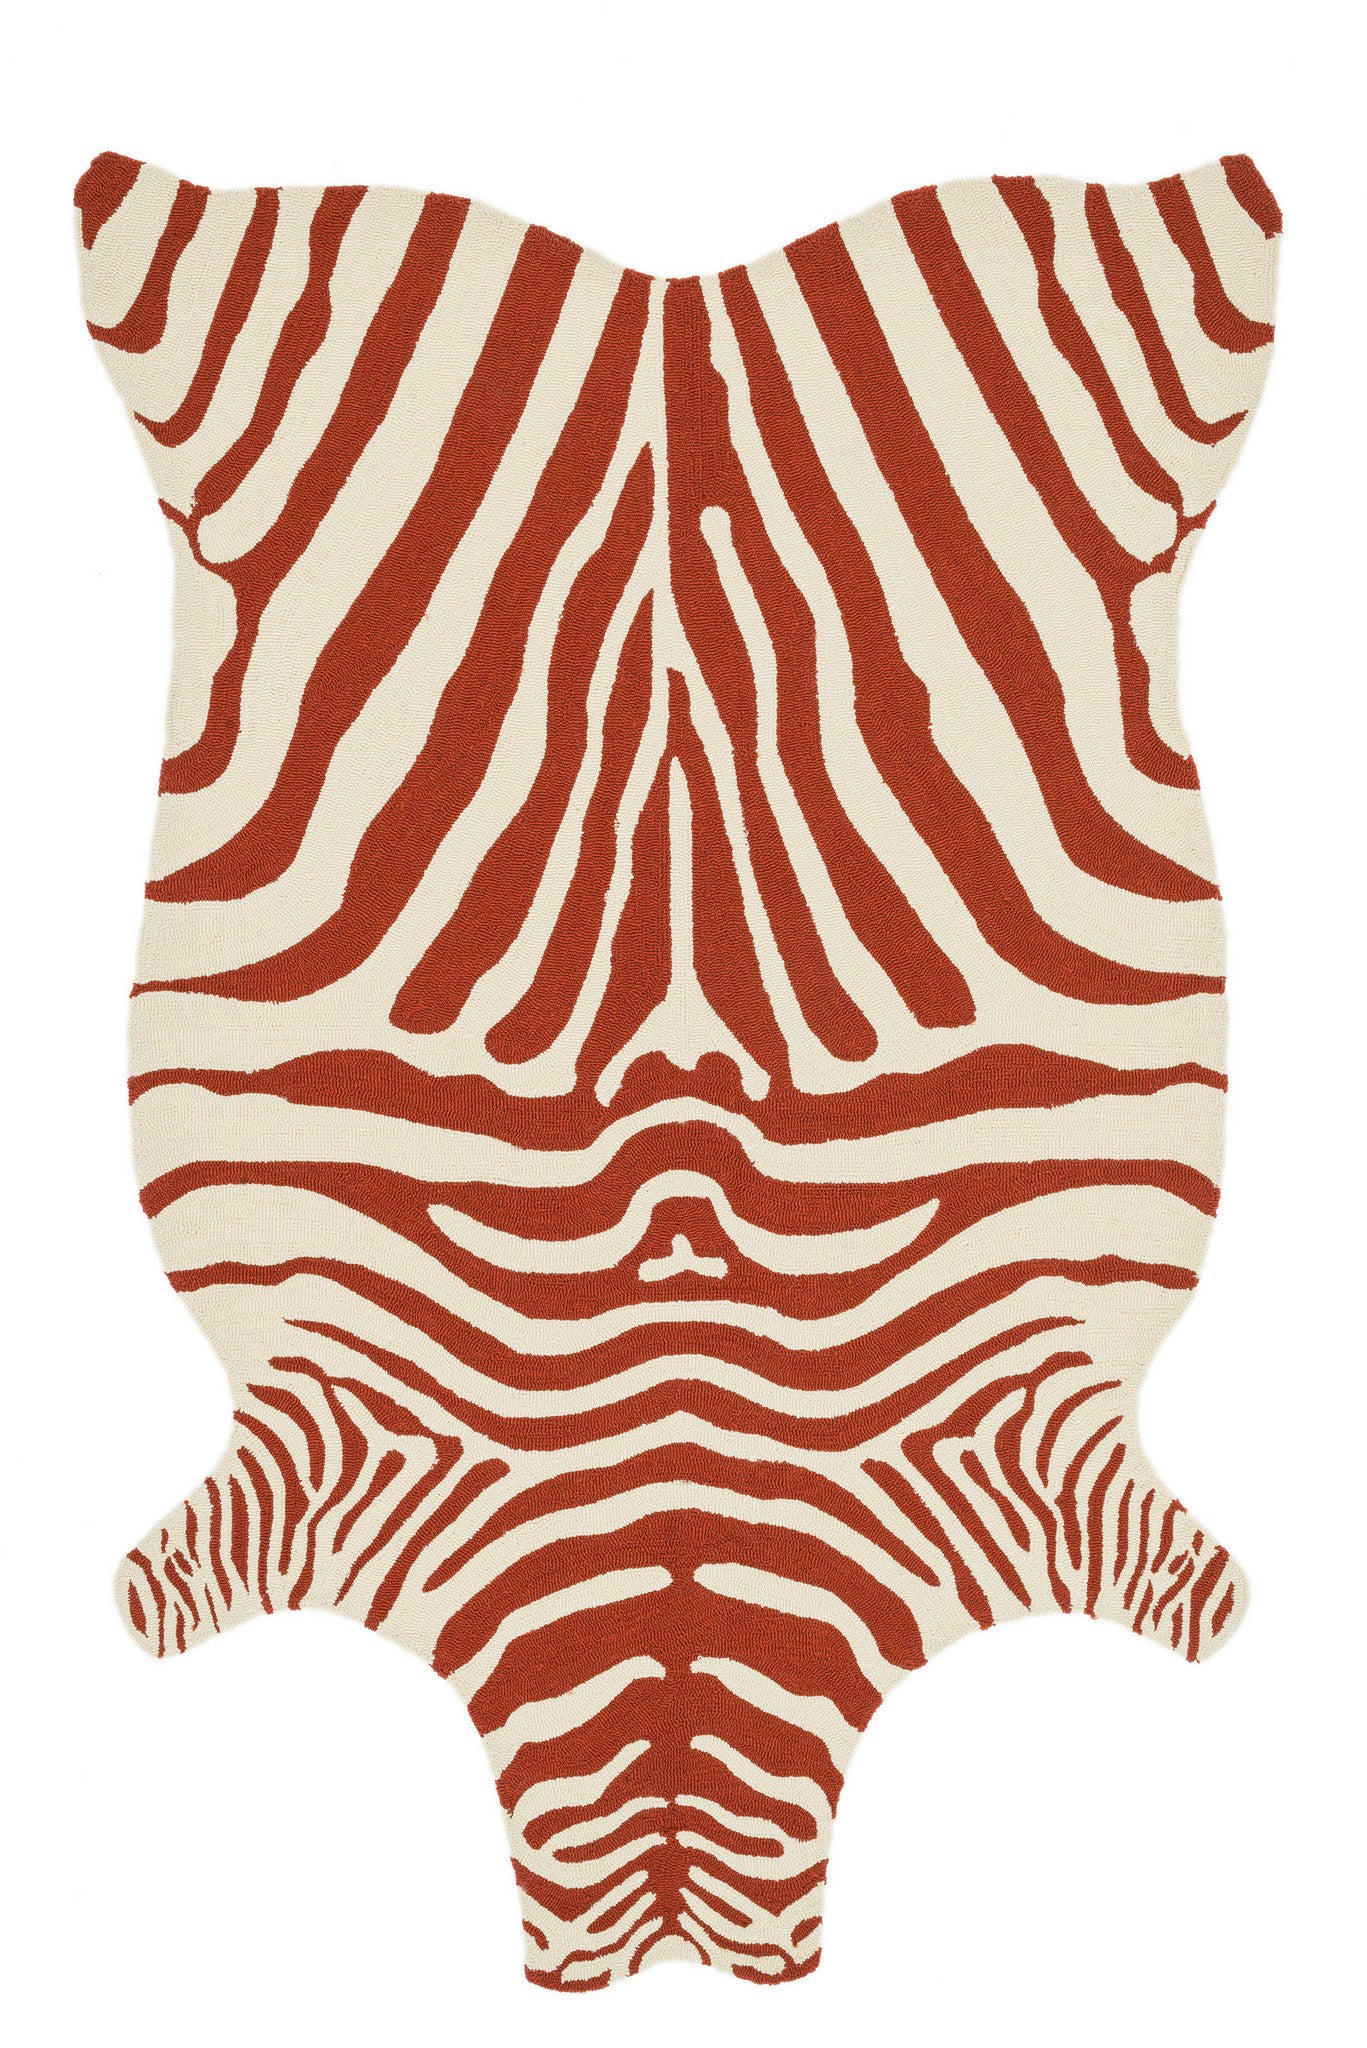 Loloi Zadie ZD-01 Red / Ivory Area Rug main image